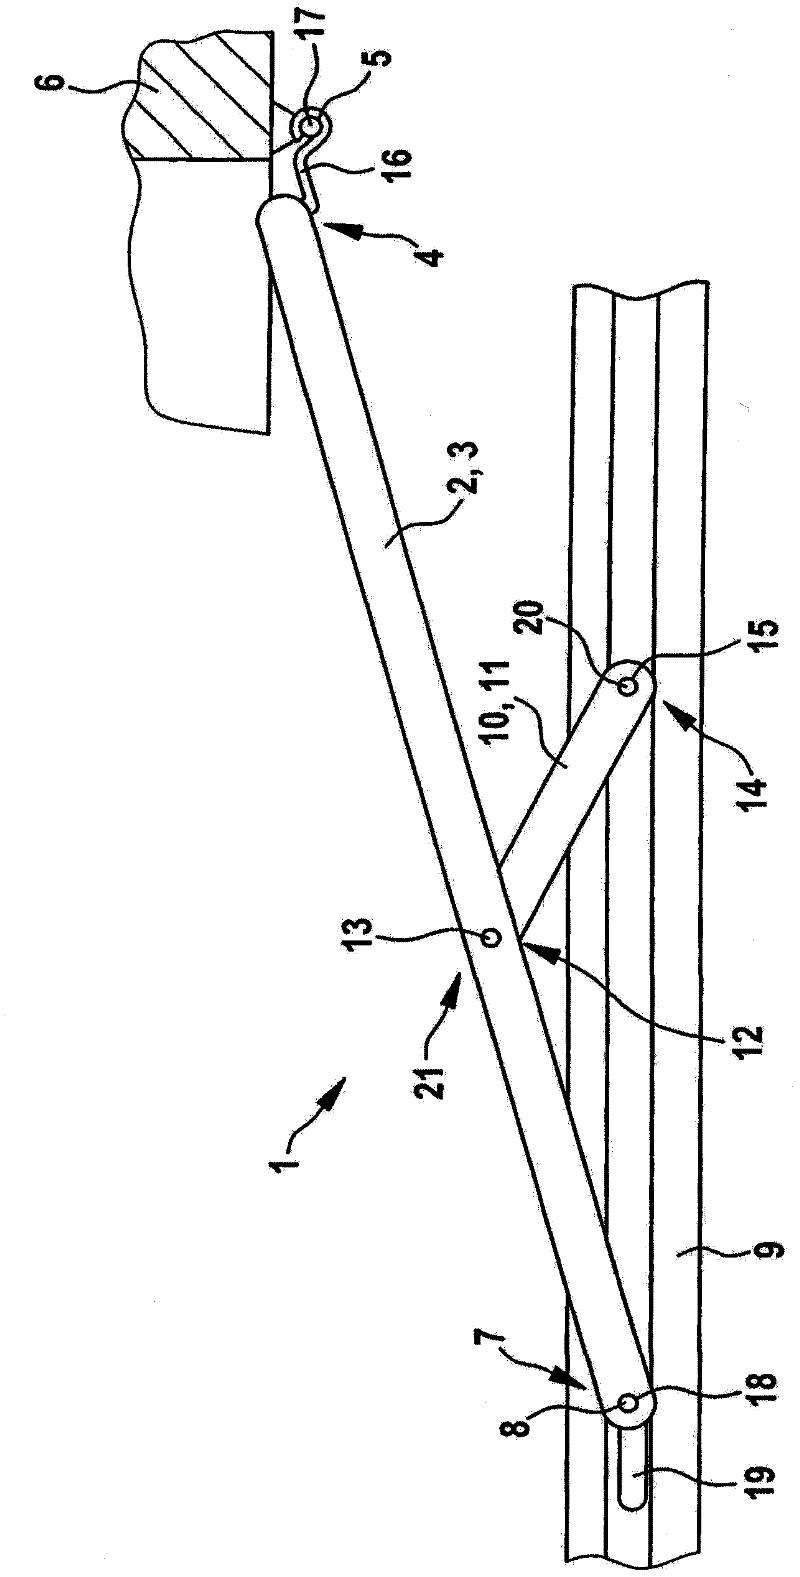 Hinged opening device for a window, a door, or the like